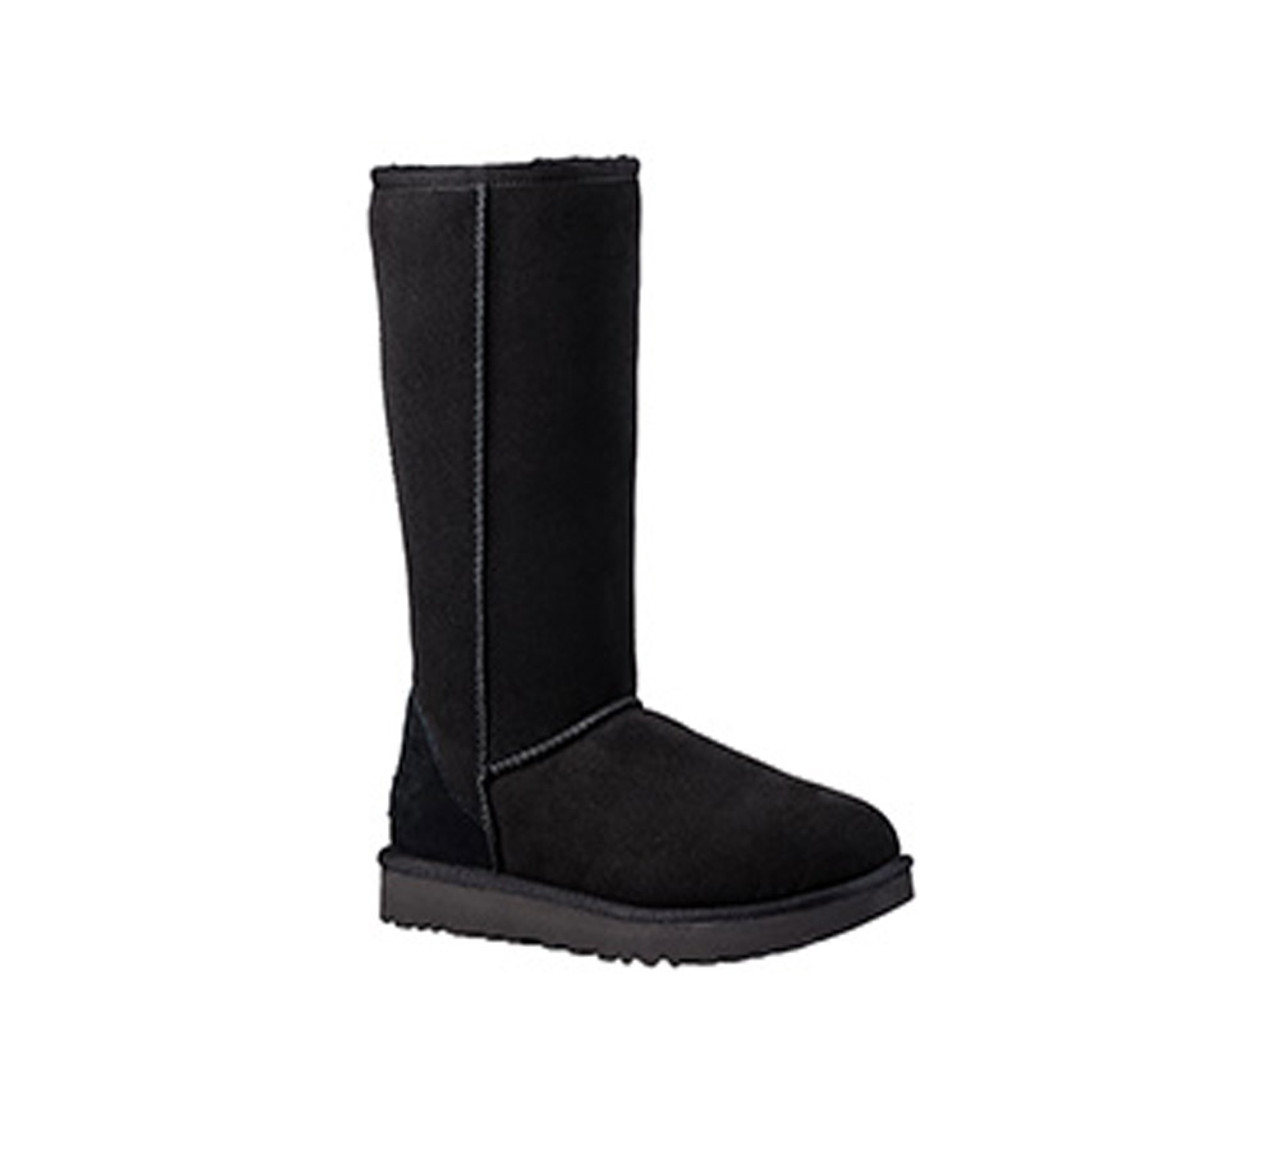 tall grey ugg boots sale